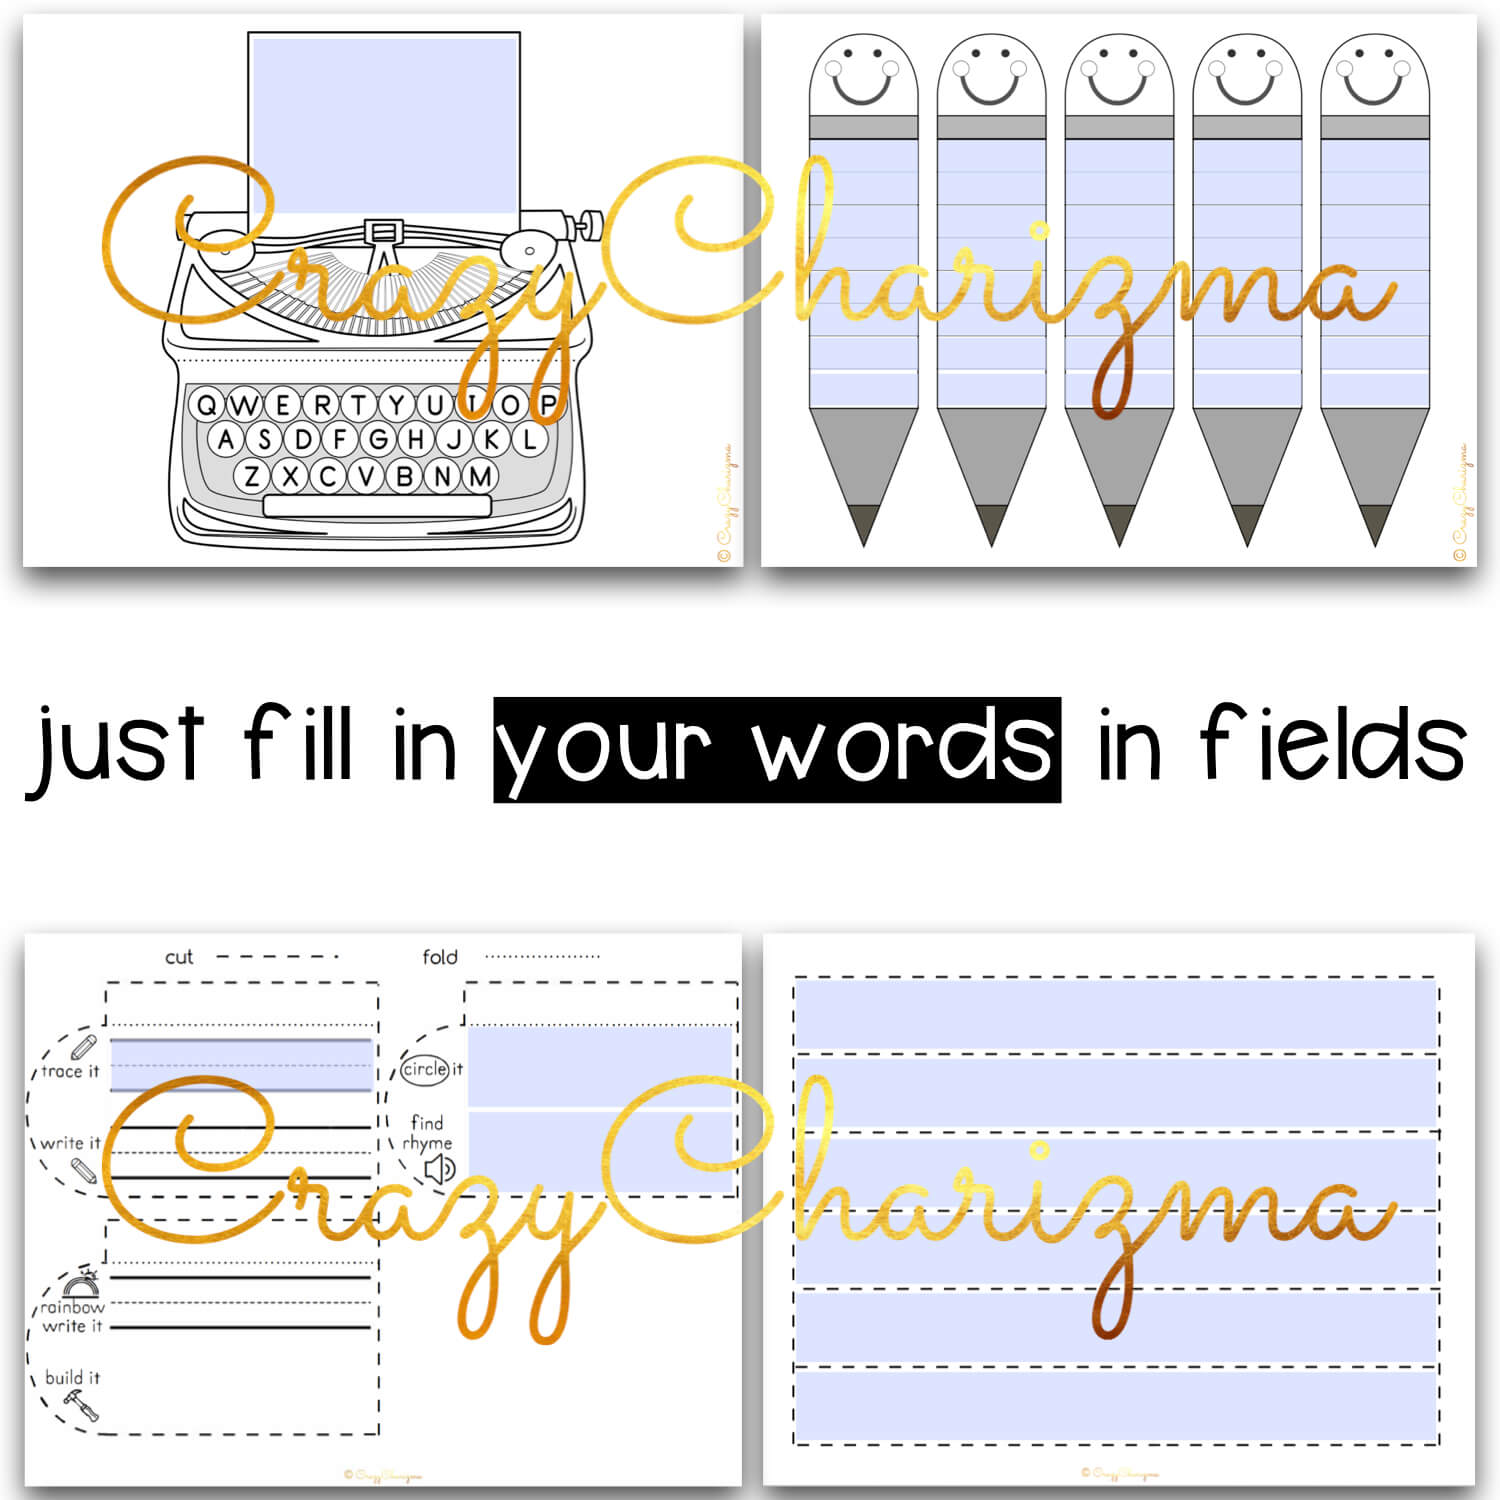 Keep your students excited about learning and practicing their sight words! This Interactive Notebook for Sight Words activities is a fun and hands-on way to cover 220 high frequency words. Increase reading fluency for your struggling readers, ELA's and special needs students. The packet is perfect for advanced prek, kindergarten, first, second and third grade kids.